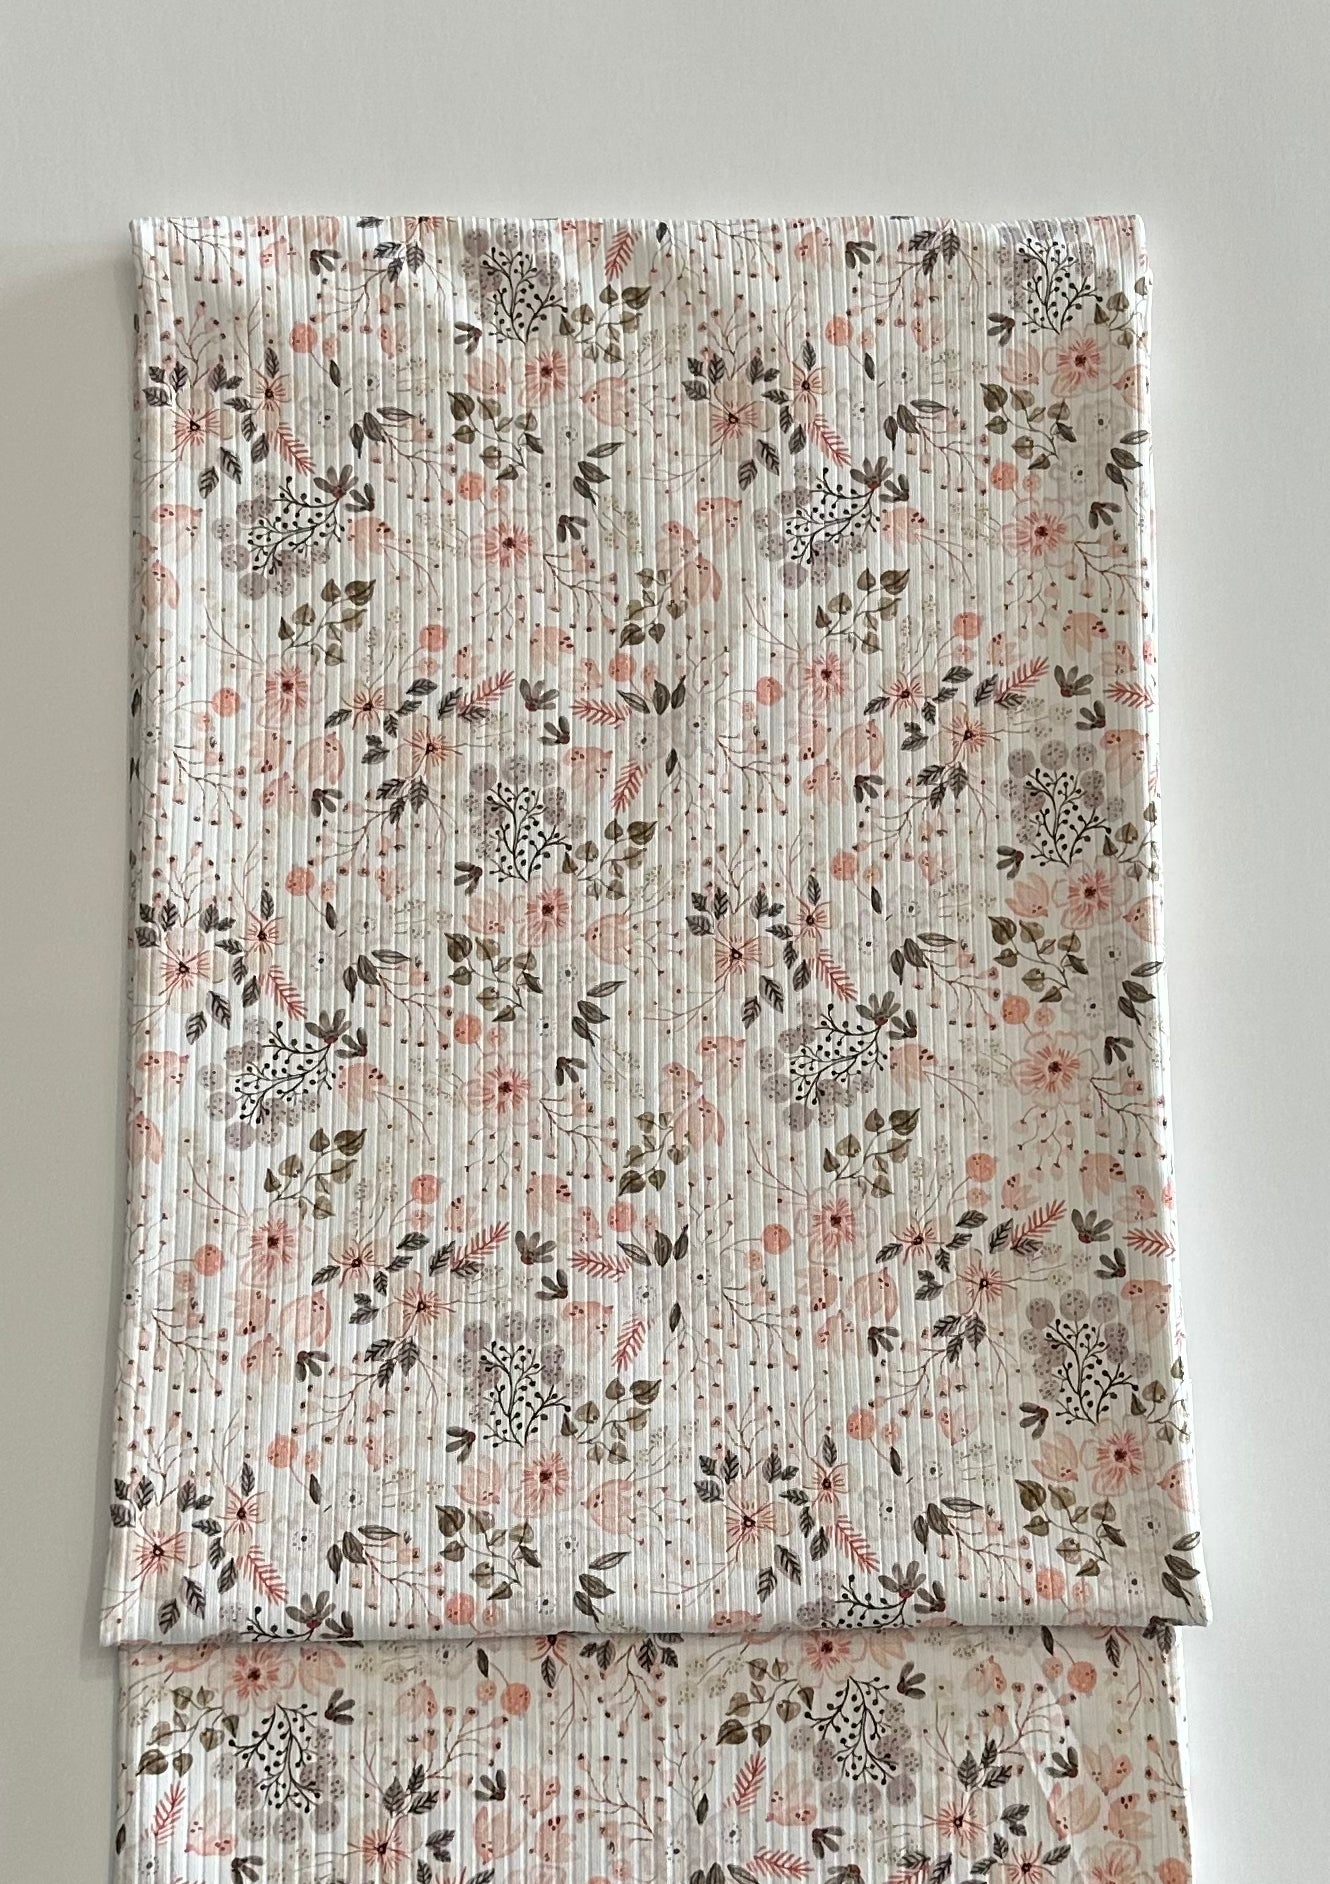 Brenna Floral in White on Unbrushed Rib Knit Fabric Sold by the 1/4 yard